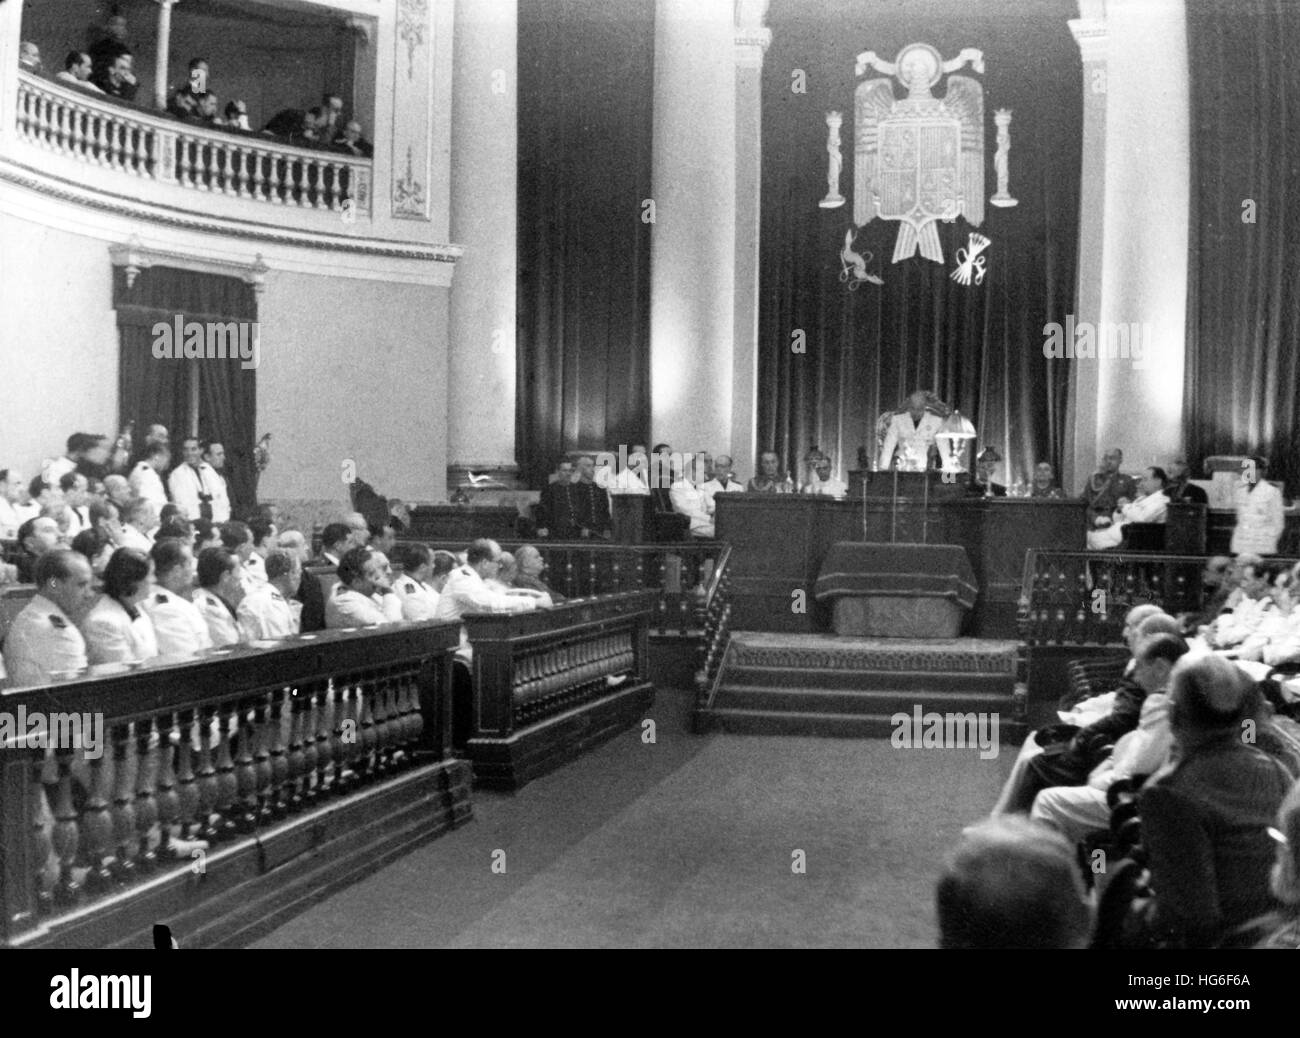 The Nazi propaganda picture shows Spanish dictator Francisco Franco reading the 'Law Constituting the Cortes' (Parliament in Spain) in front of the National Council of the Falange in the Senate of Madrid, Spain, July 1942. Fotoarchiv für Zeitgeschichtee - NO WIRE SERVICE - | usage worldwide Stock Photo